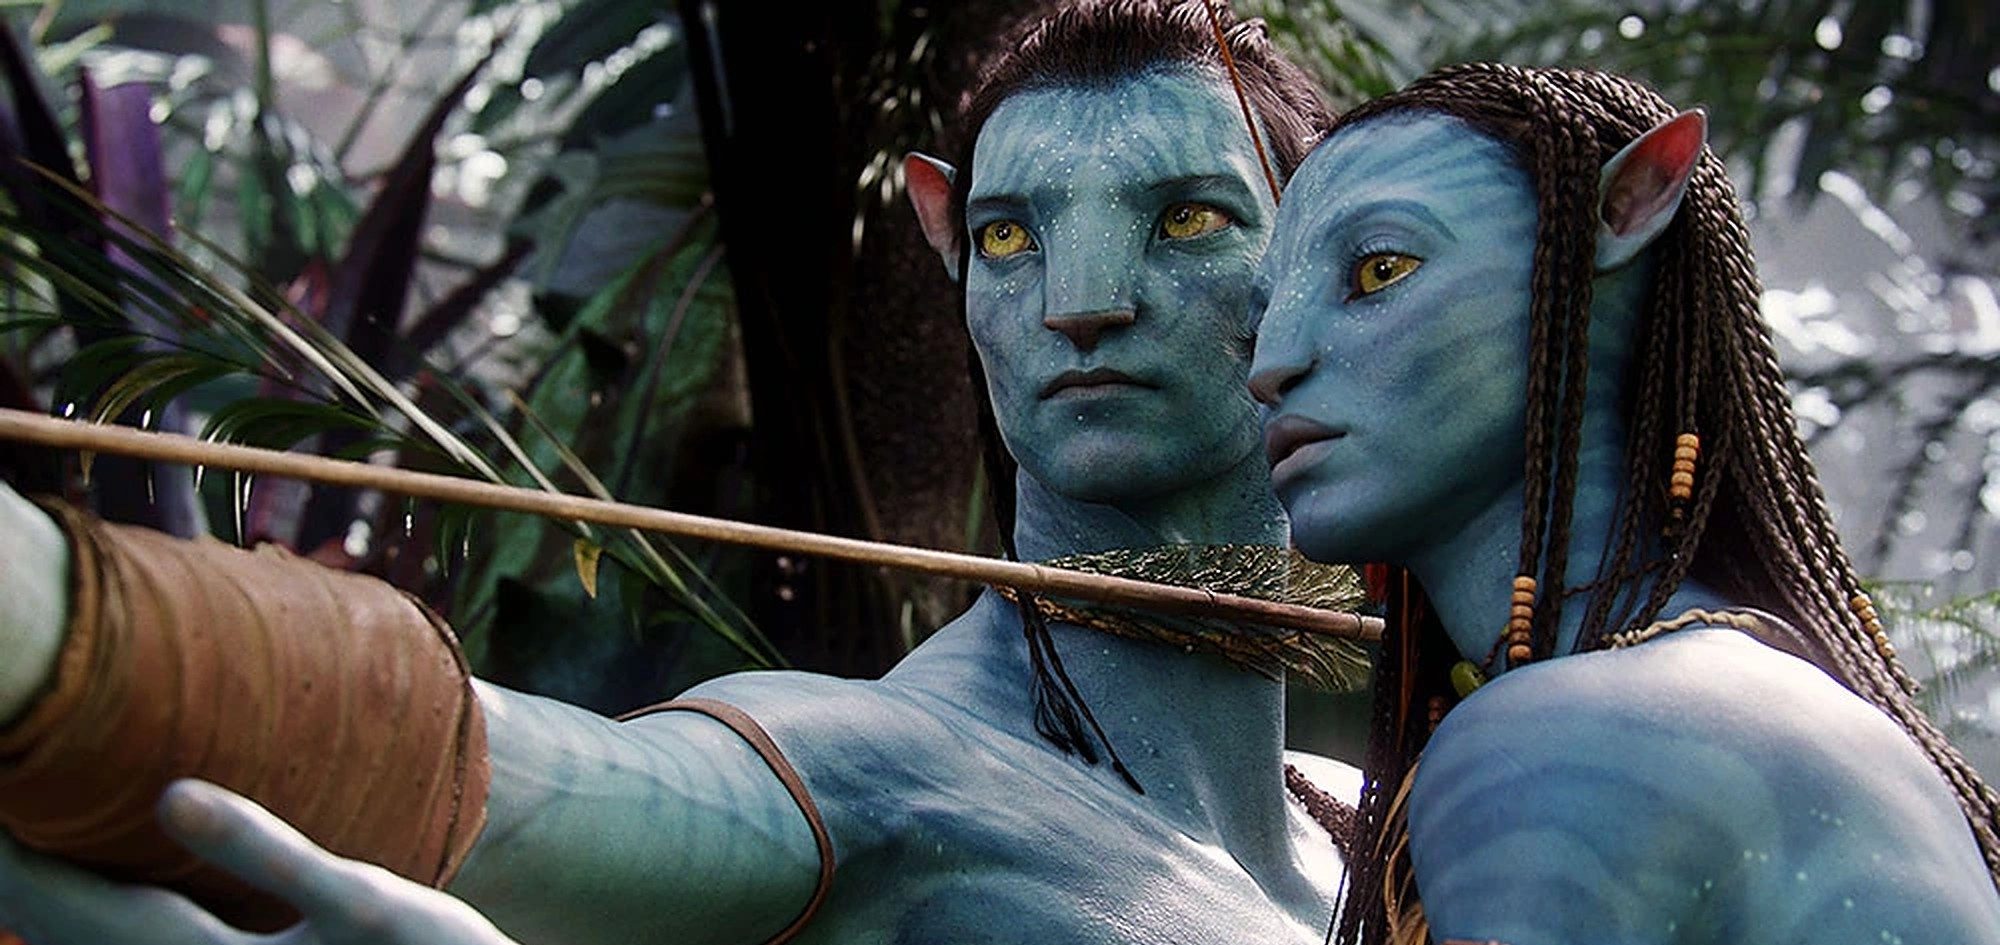 Avatar 2 Fast X and every new movie to watch at home this weekend   Polygon